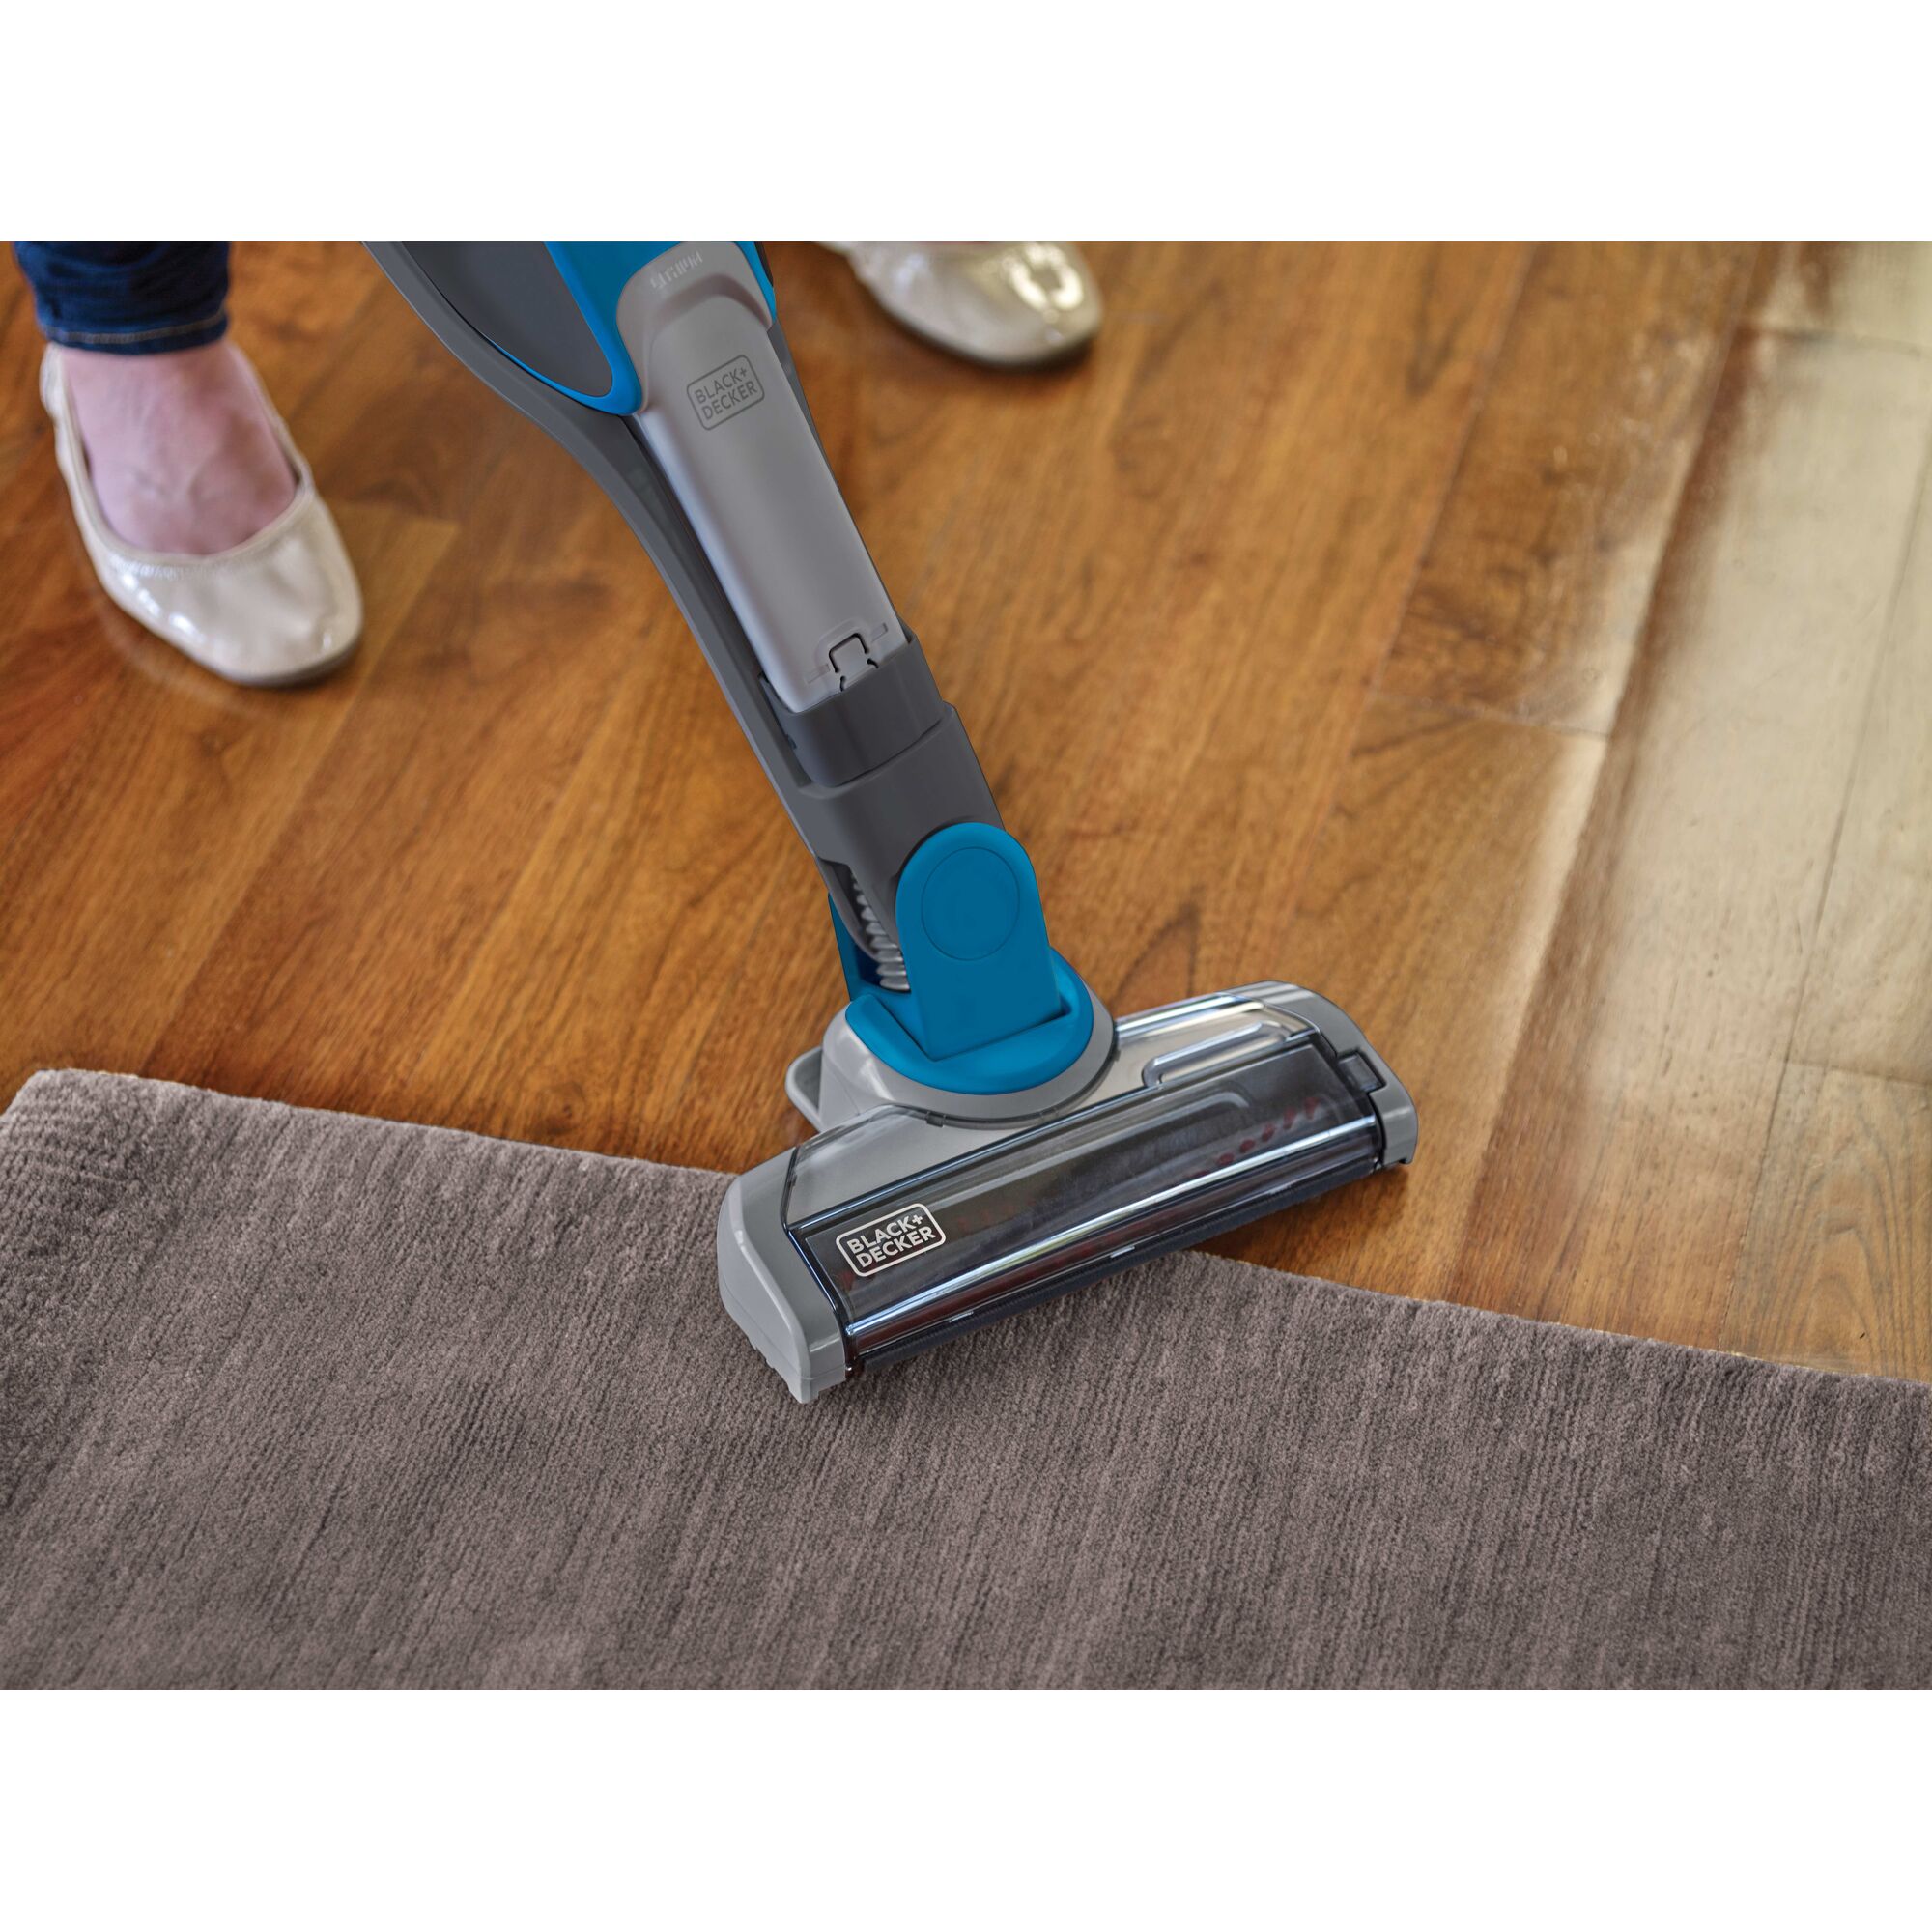 Cleans both floors and carpet feature of Cordless Lithium 2 in 1 Stick Vacuum.